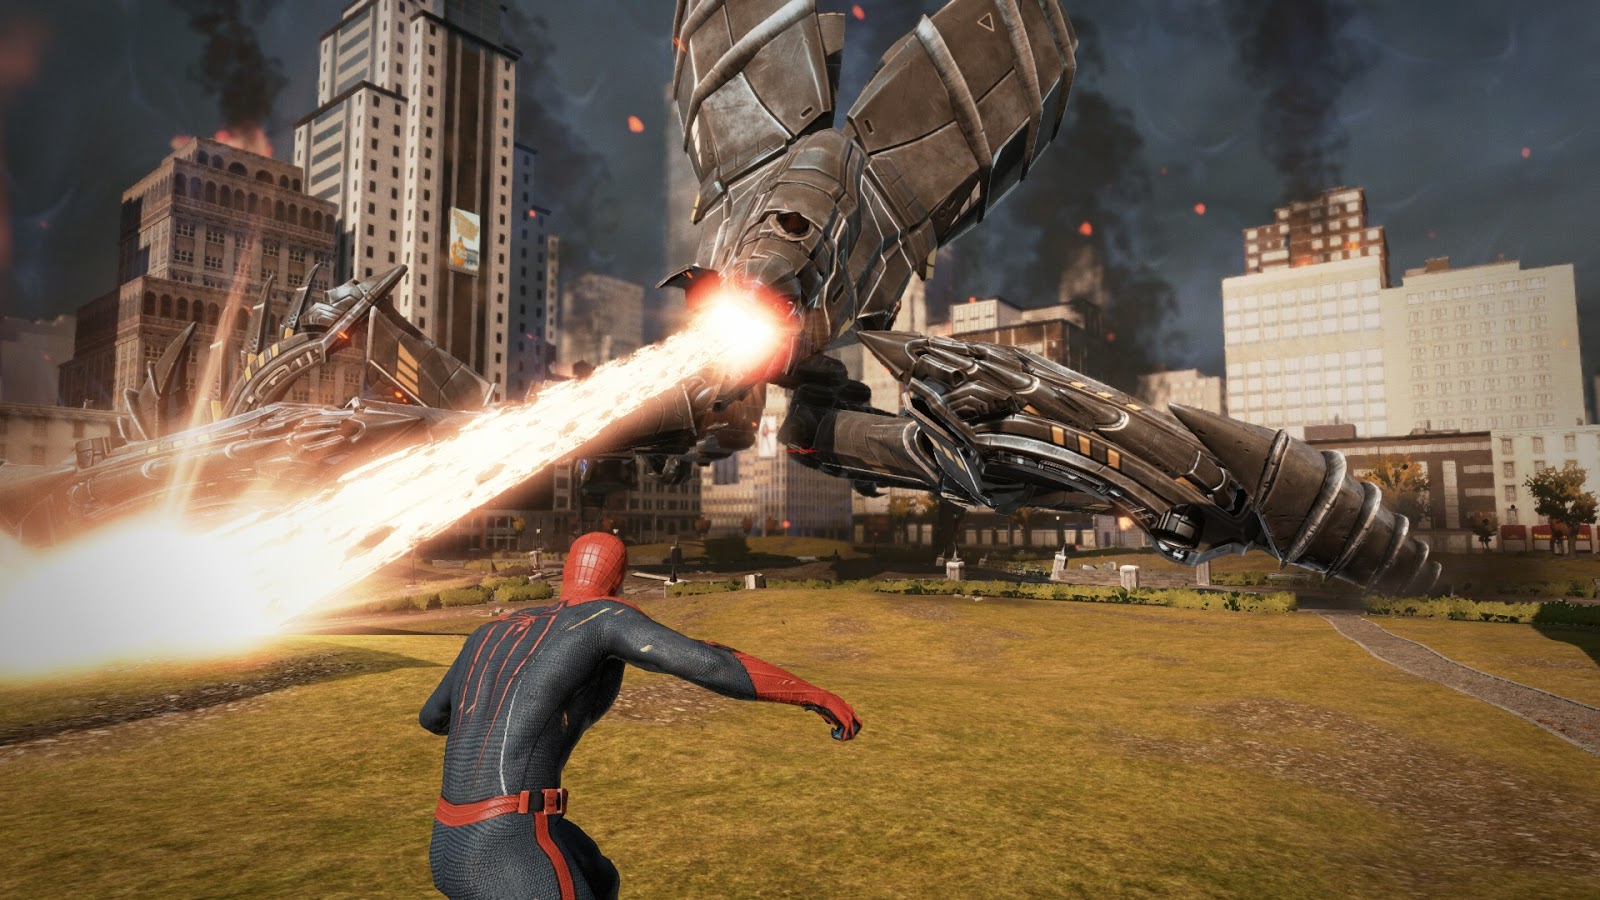 The amazing spider man pc game skidrow crack free download torrent